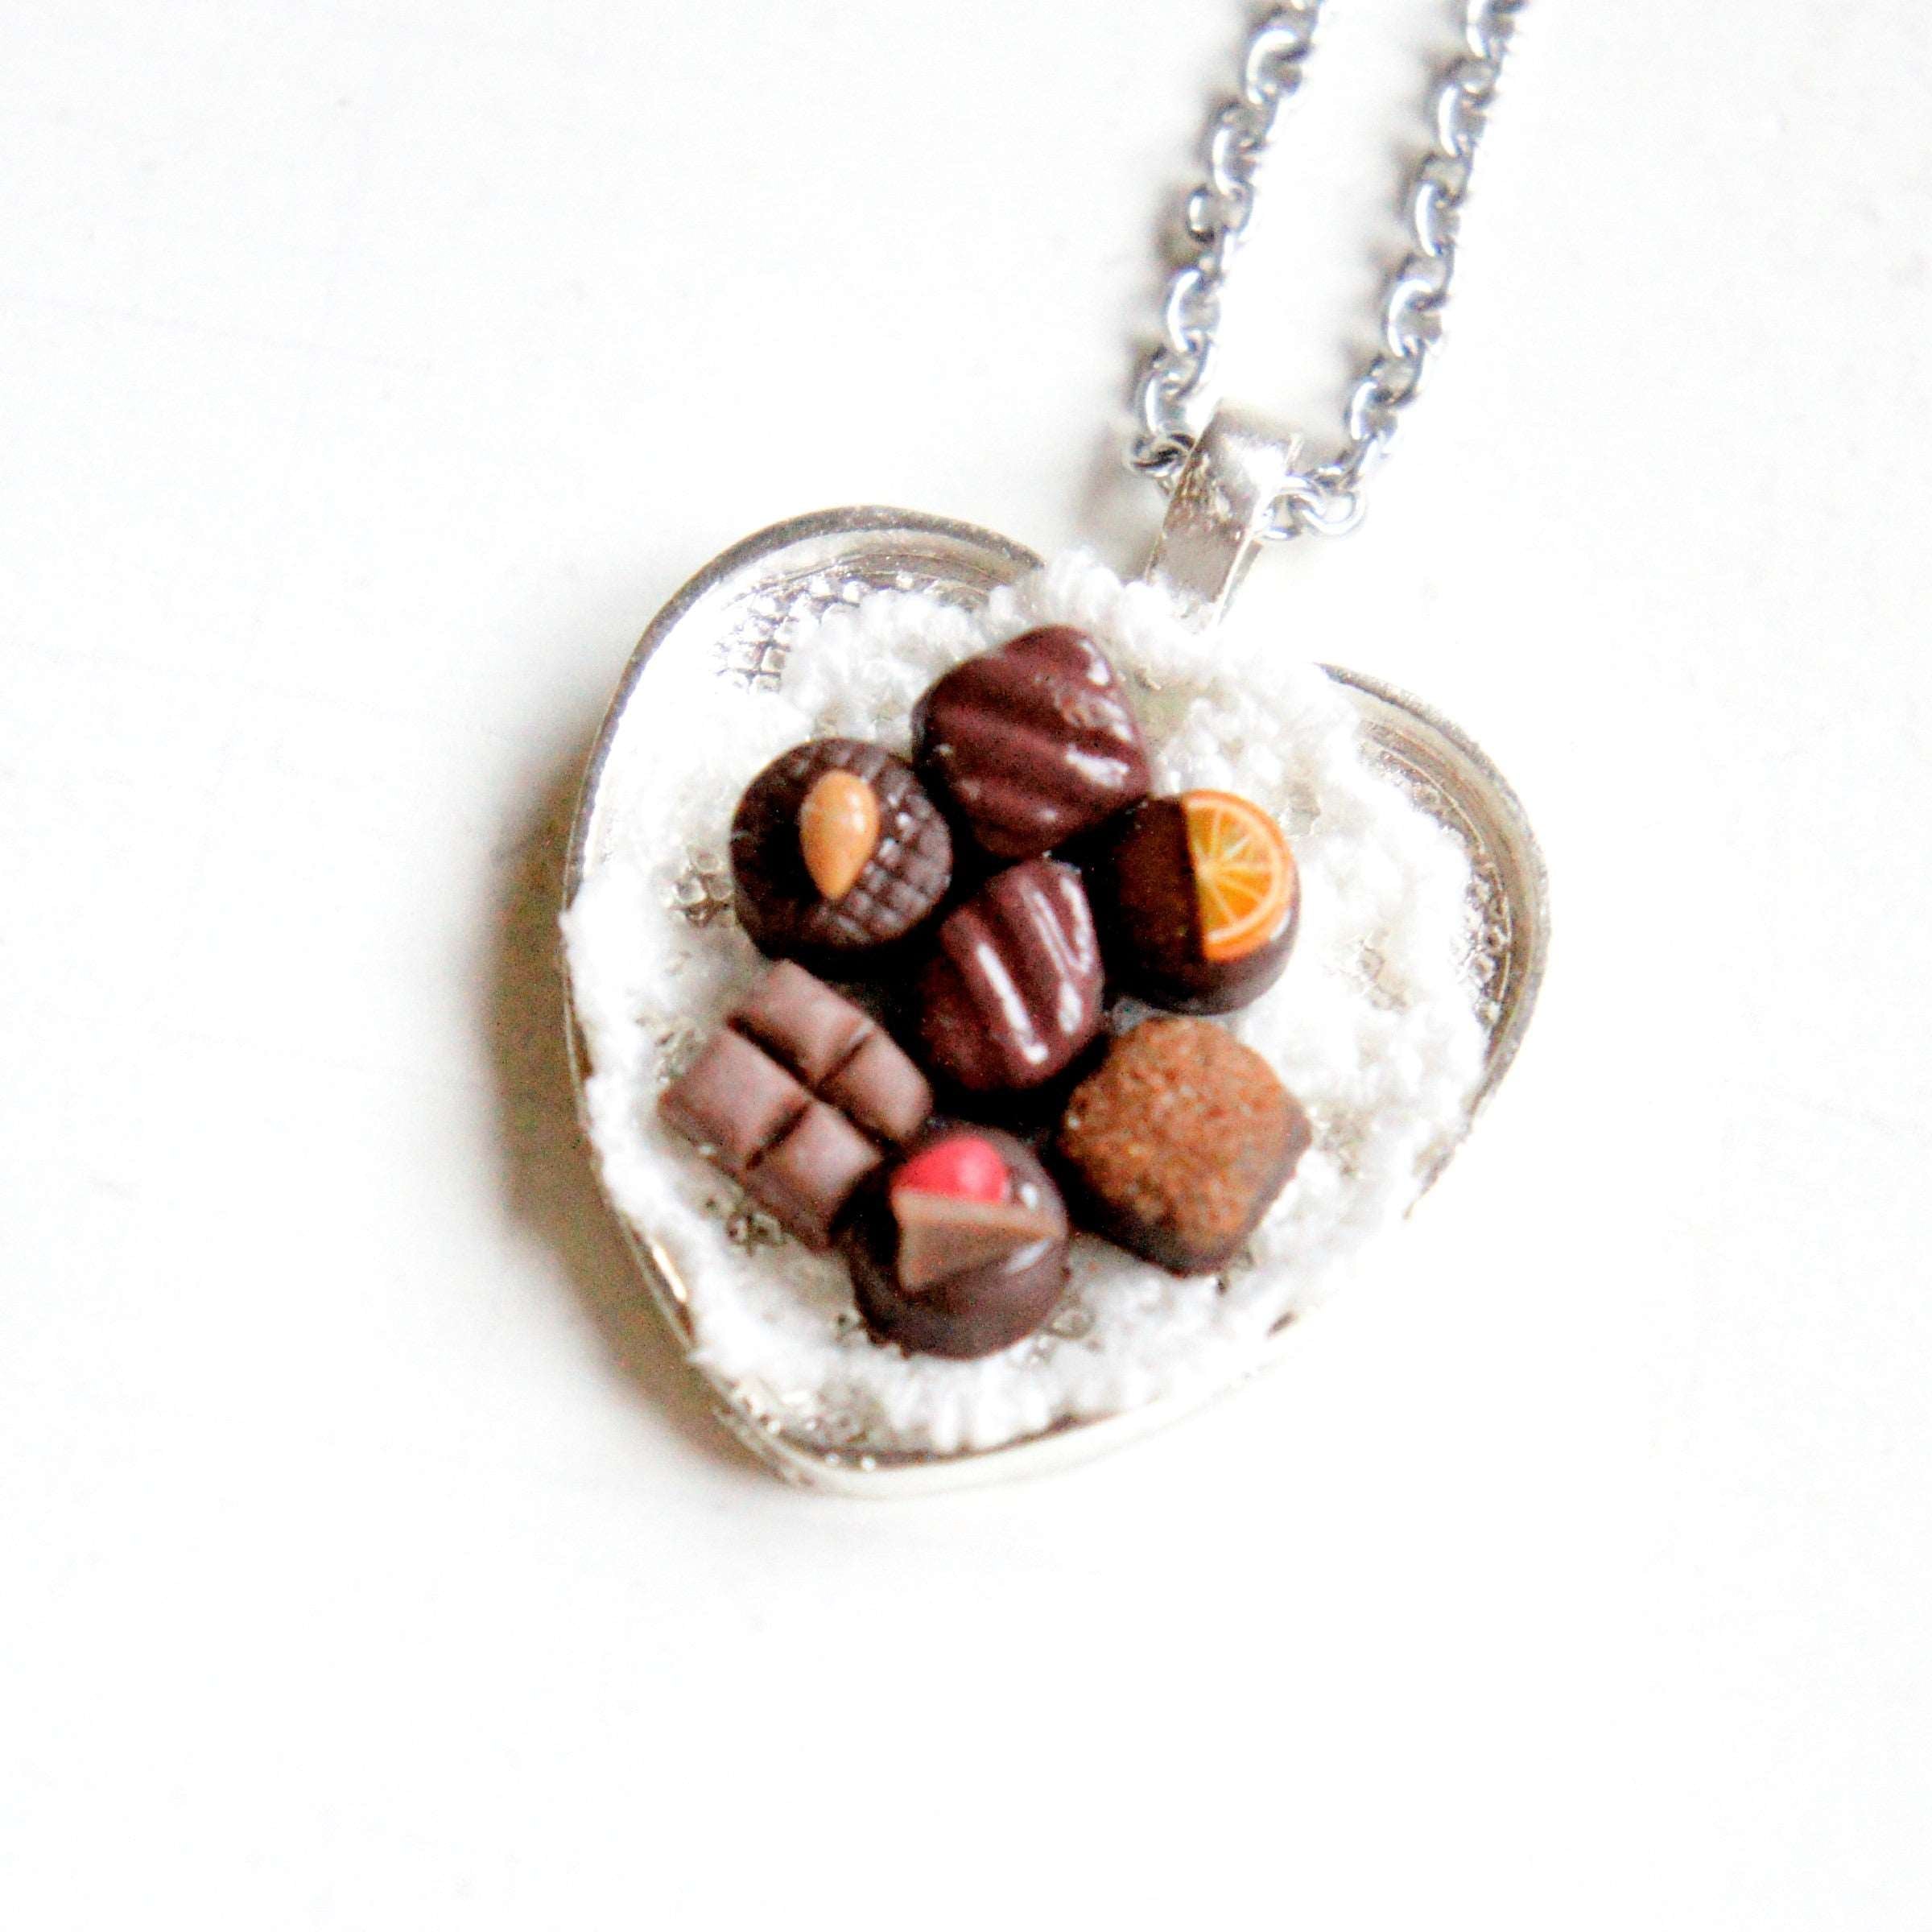 Chocolate Truffles Necklace - Jillicious charms and accessories